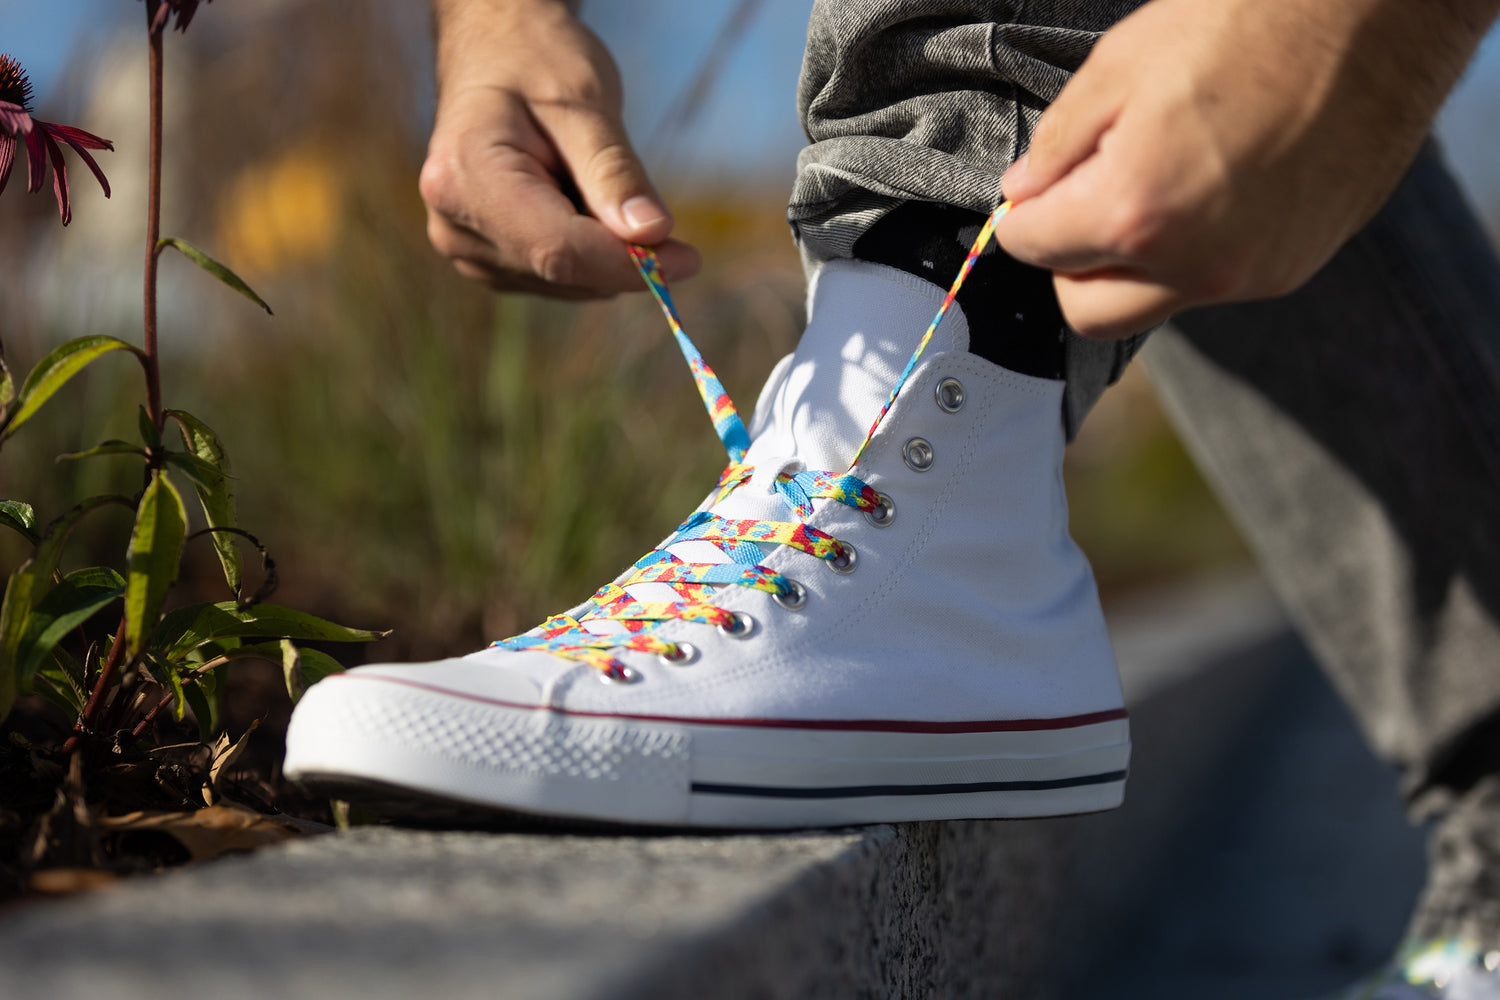 White shoe with colorful shoelaces being tied